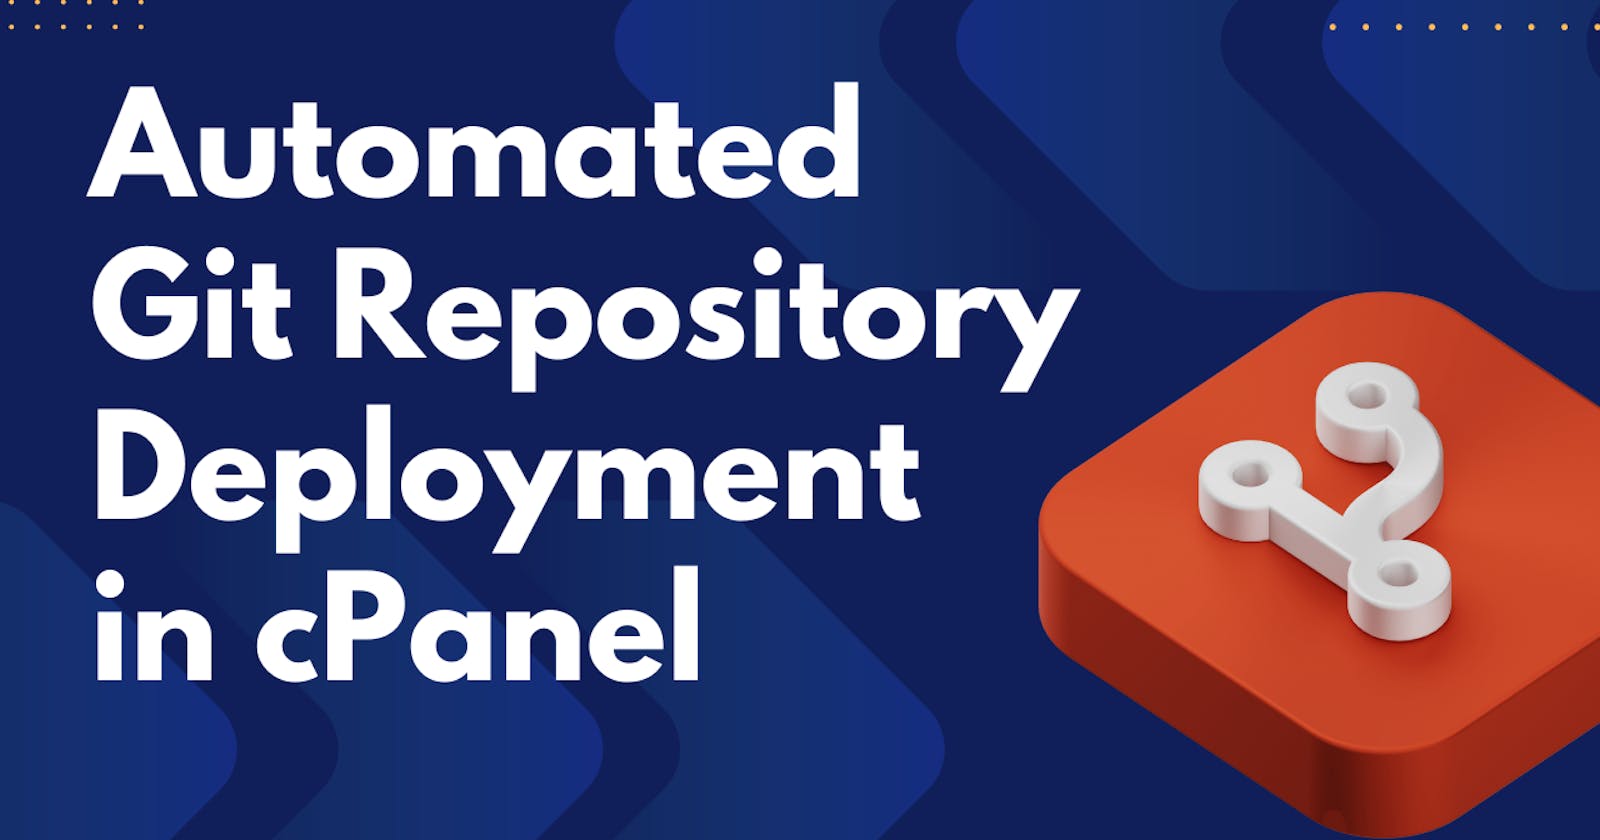 Automated Git Repository Deployment in cPanel: A Step by Step Guide